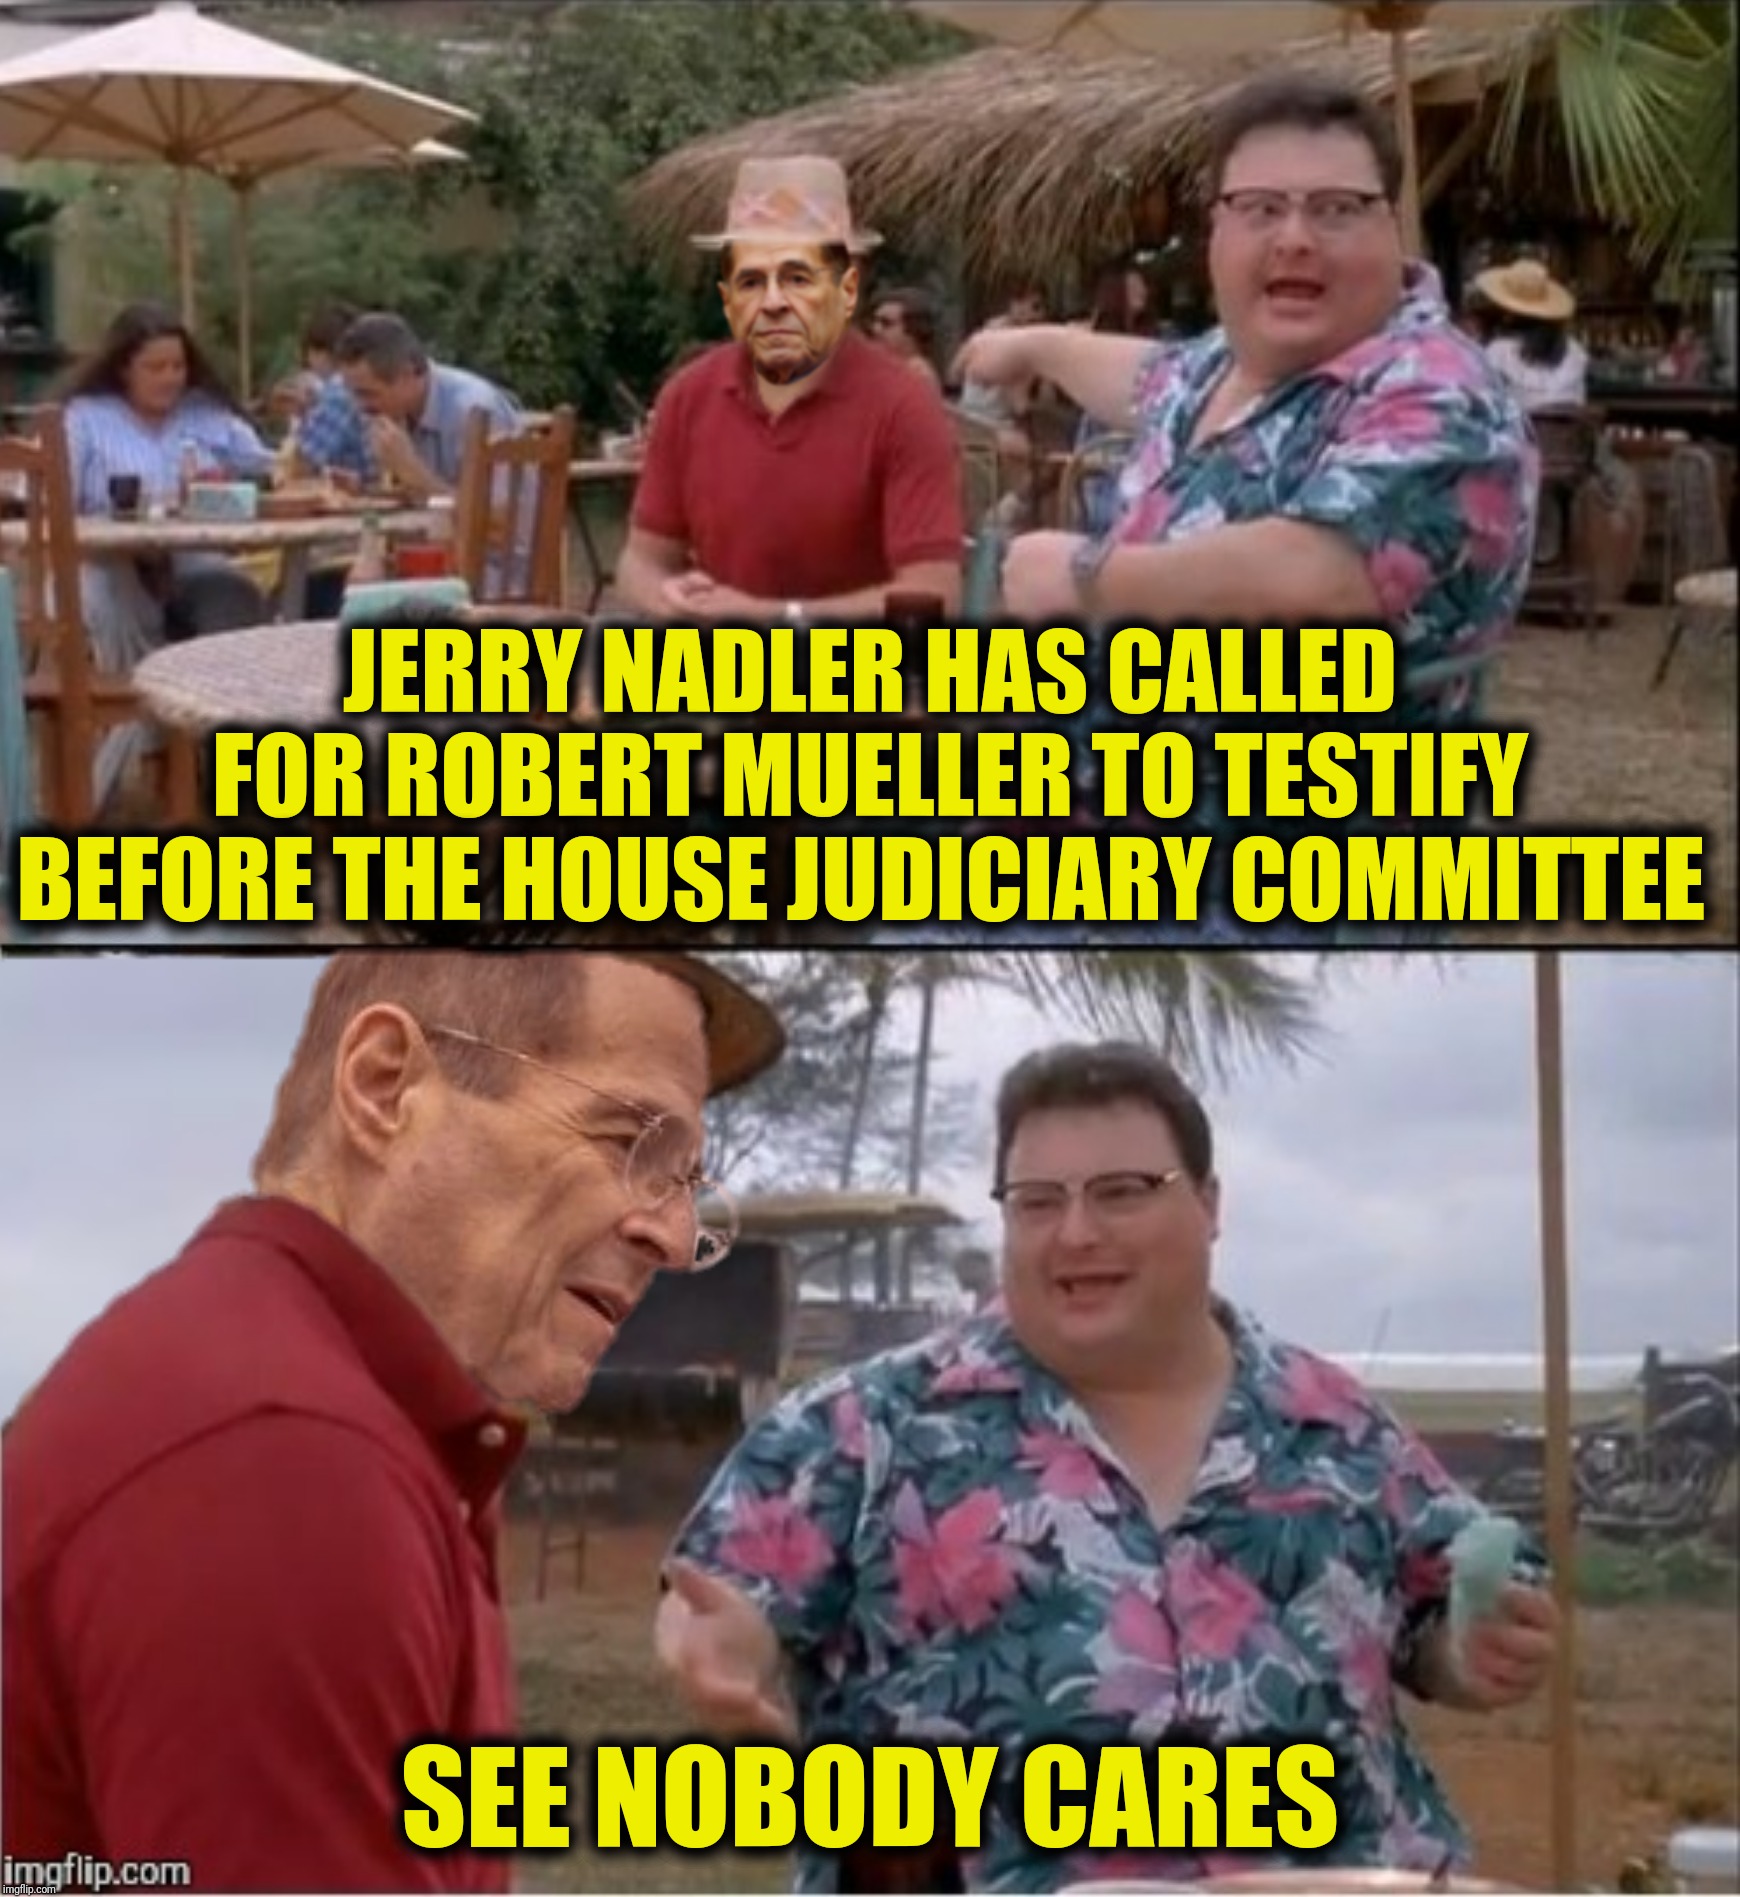 Would you like fries with your nothing burger? | JERRY NADLER HAS CALLED FOR ROBERT MUELLER TO TESTIFY BEFORE THE HOUSE JUDICIARY COMMITTEE; SEE NOBODY CARES | image tagged in see nobody cares,jerry nadless,robert mueller | made w/ Imgflip meme maker